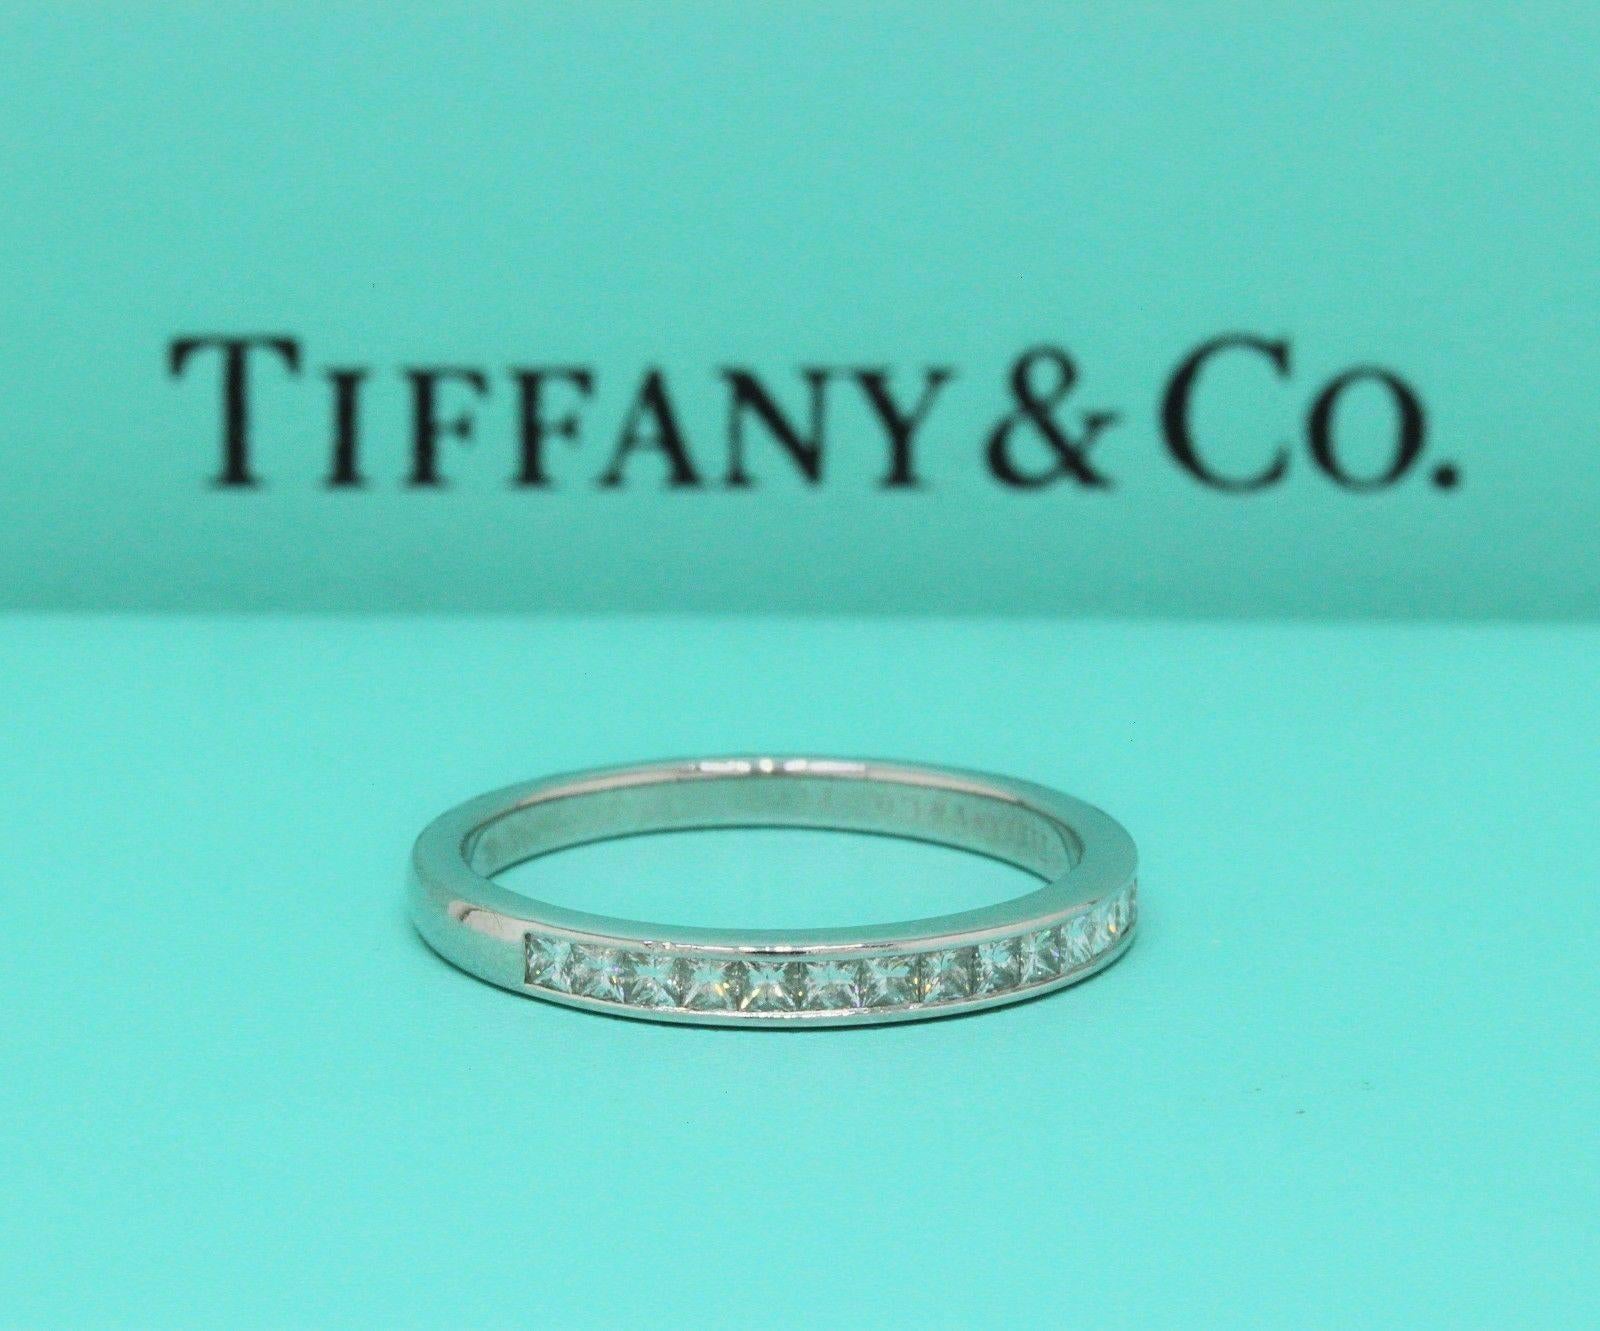 Tiffany & Co. Square Cut Diamond Wedding Band Ring in Platinum 0.39 tcw 2.6 MM For Sale 2